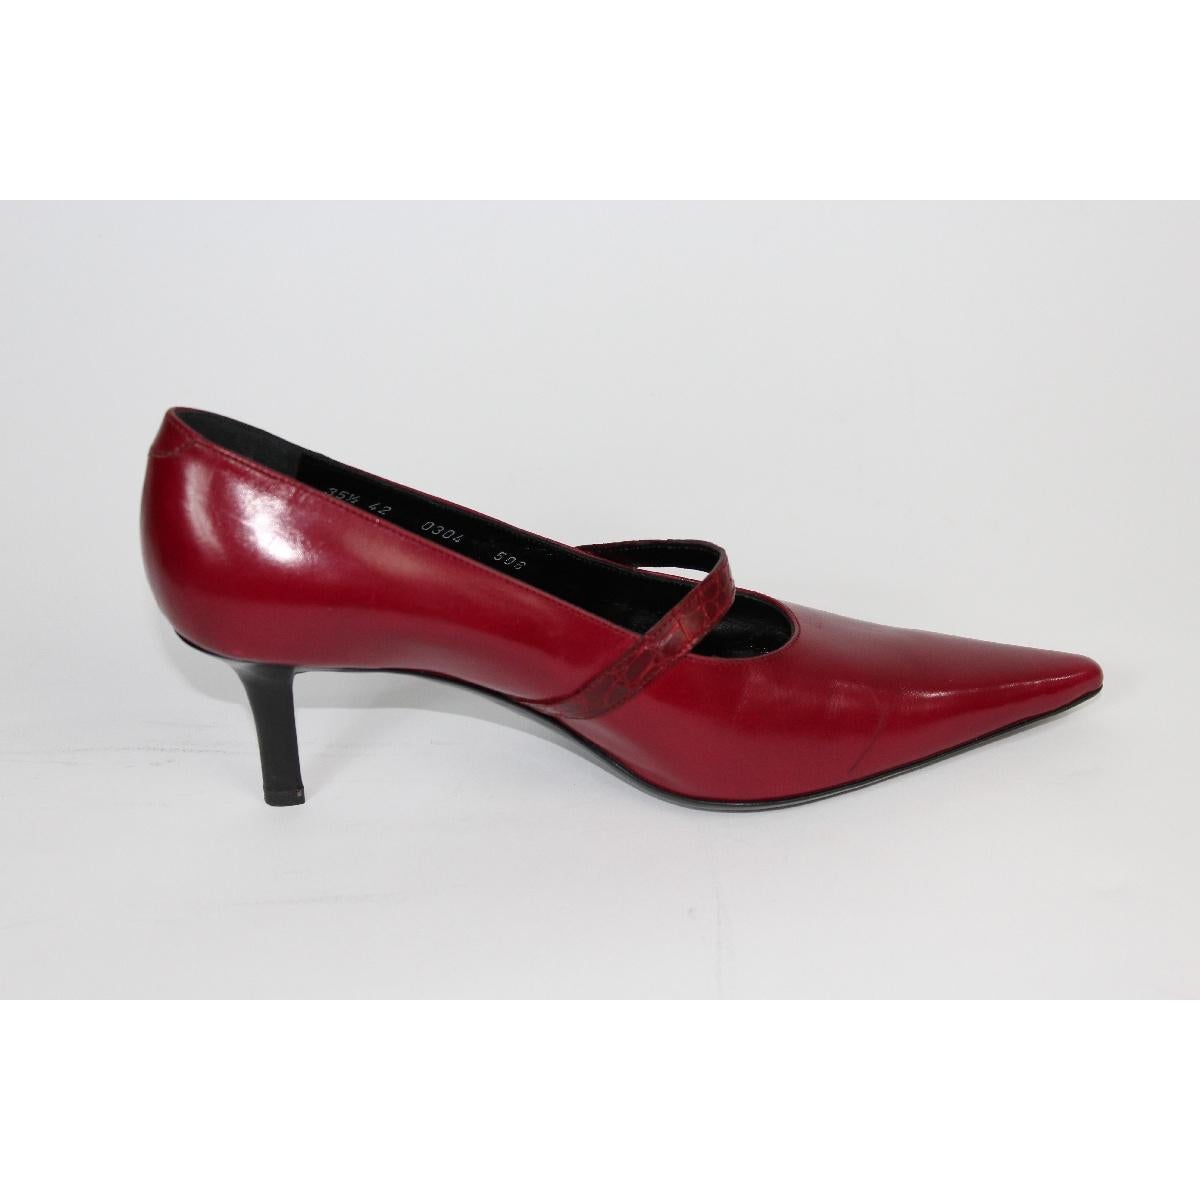 Roberta di Camerino Red Pump Heels Decollete Shoes 5, 5 1980s In New Condition In Brindisi, Bt